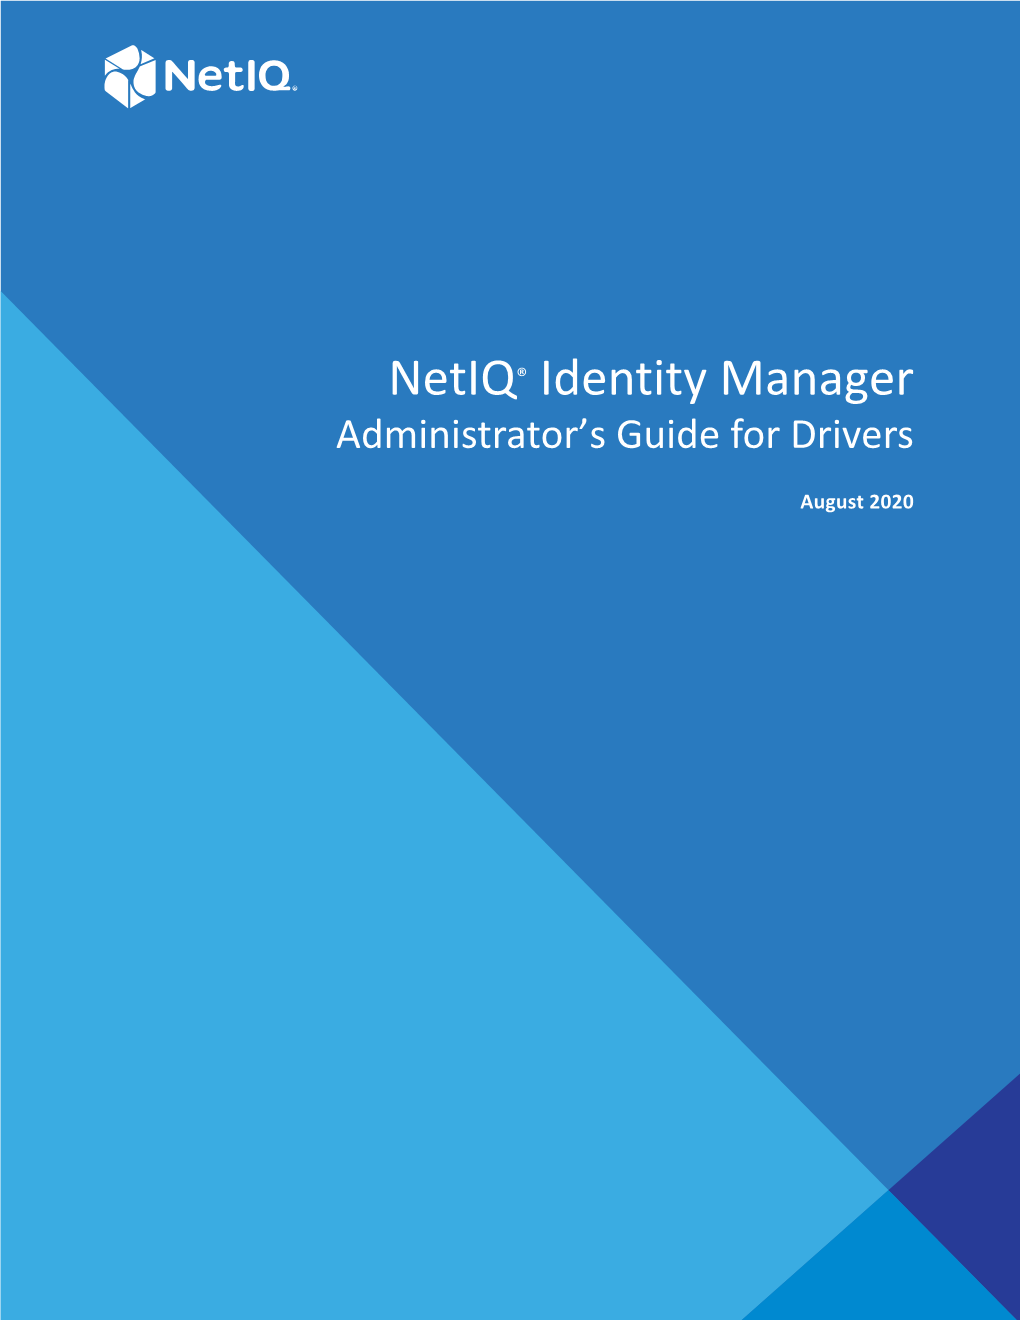 Netiq Identity Manager Driver Administration Guide